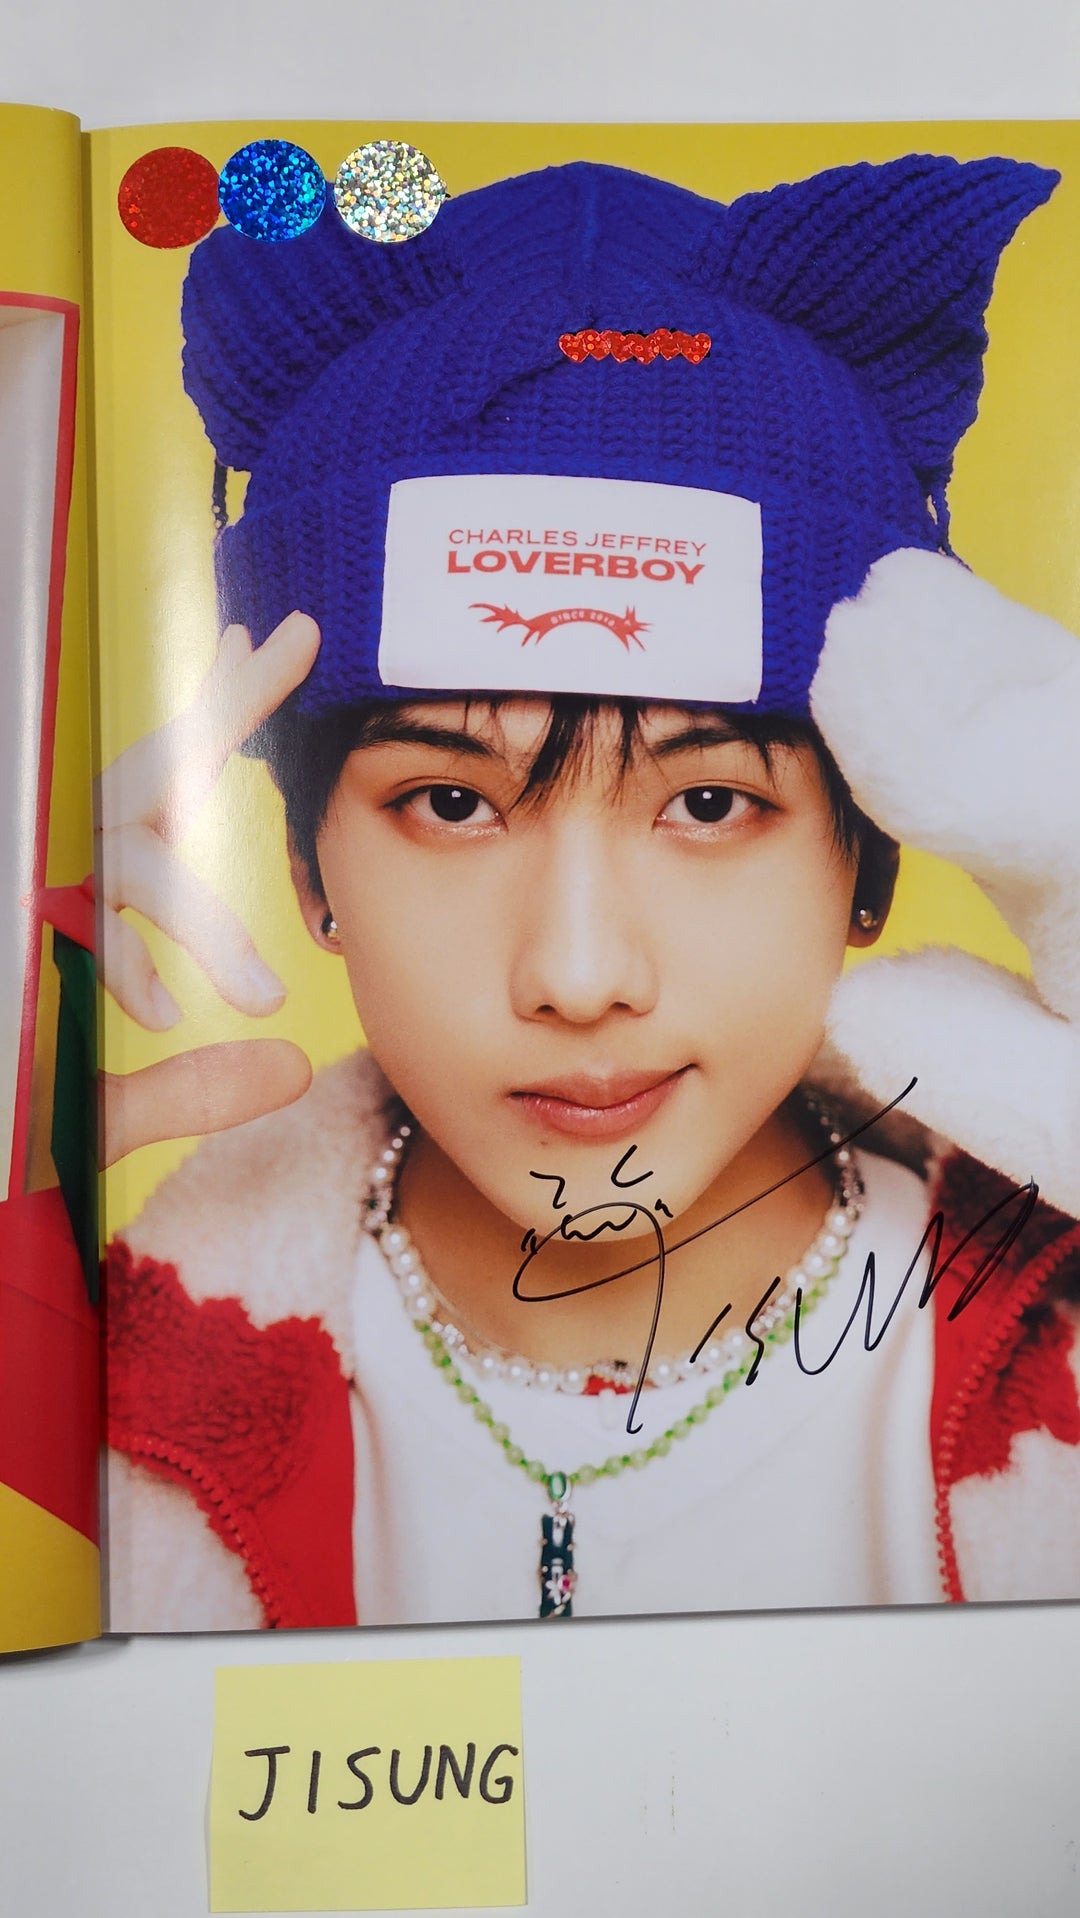 Jisung (Of NCT DREAM) "Candy" Winter Special Mini Album - Hand Autographed(Signed) Album